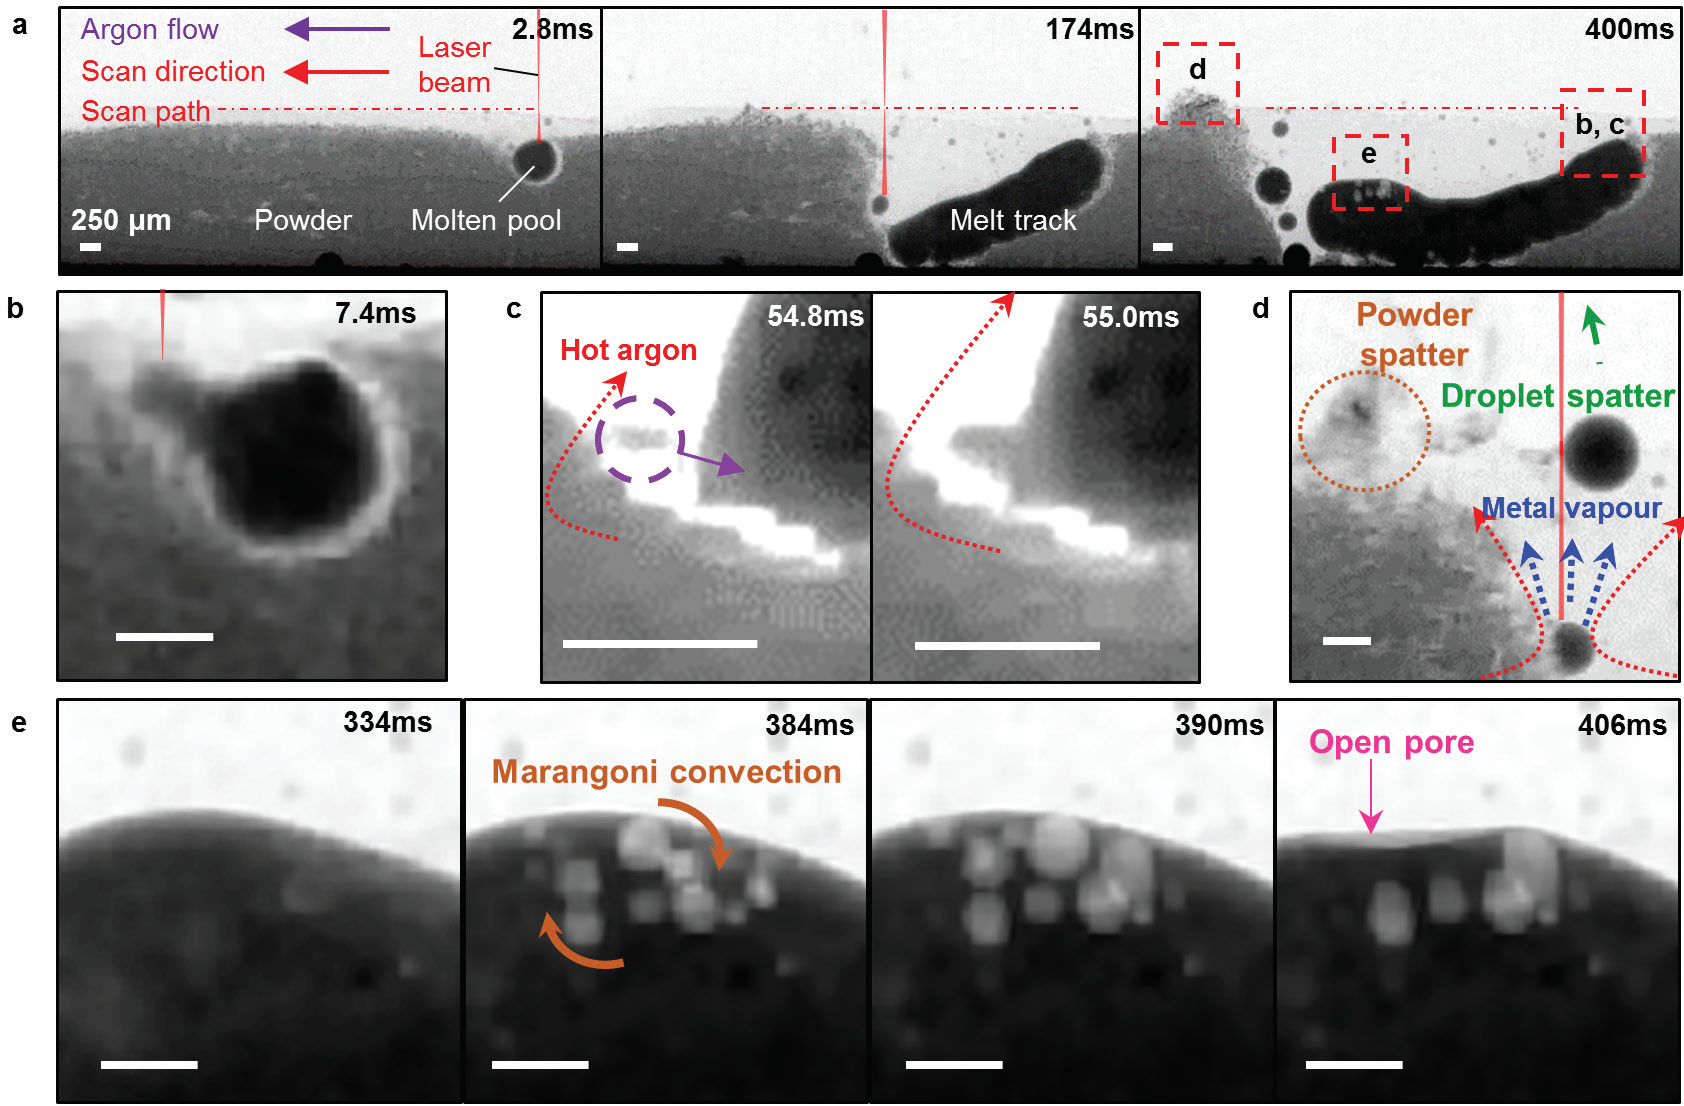 Figure 1: Time series radiographs showing (a) the evolution of a single layer Invar 36 melt track, whereby the melt track formation is driven by<br/>(b) molten pool wetting and (c) powder entrainment, and the evolution of (d) spatter and (e) porosity.